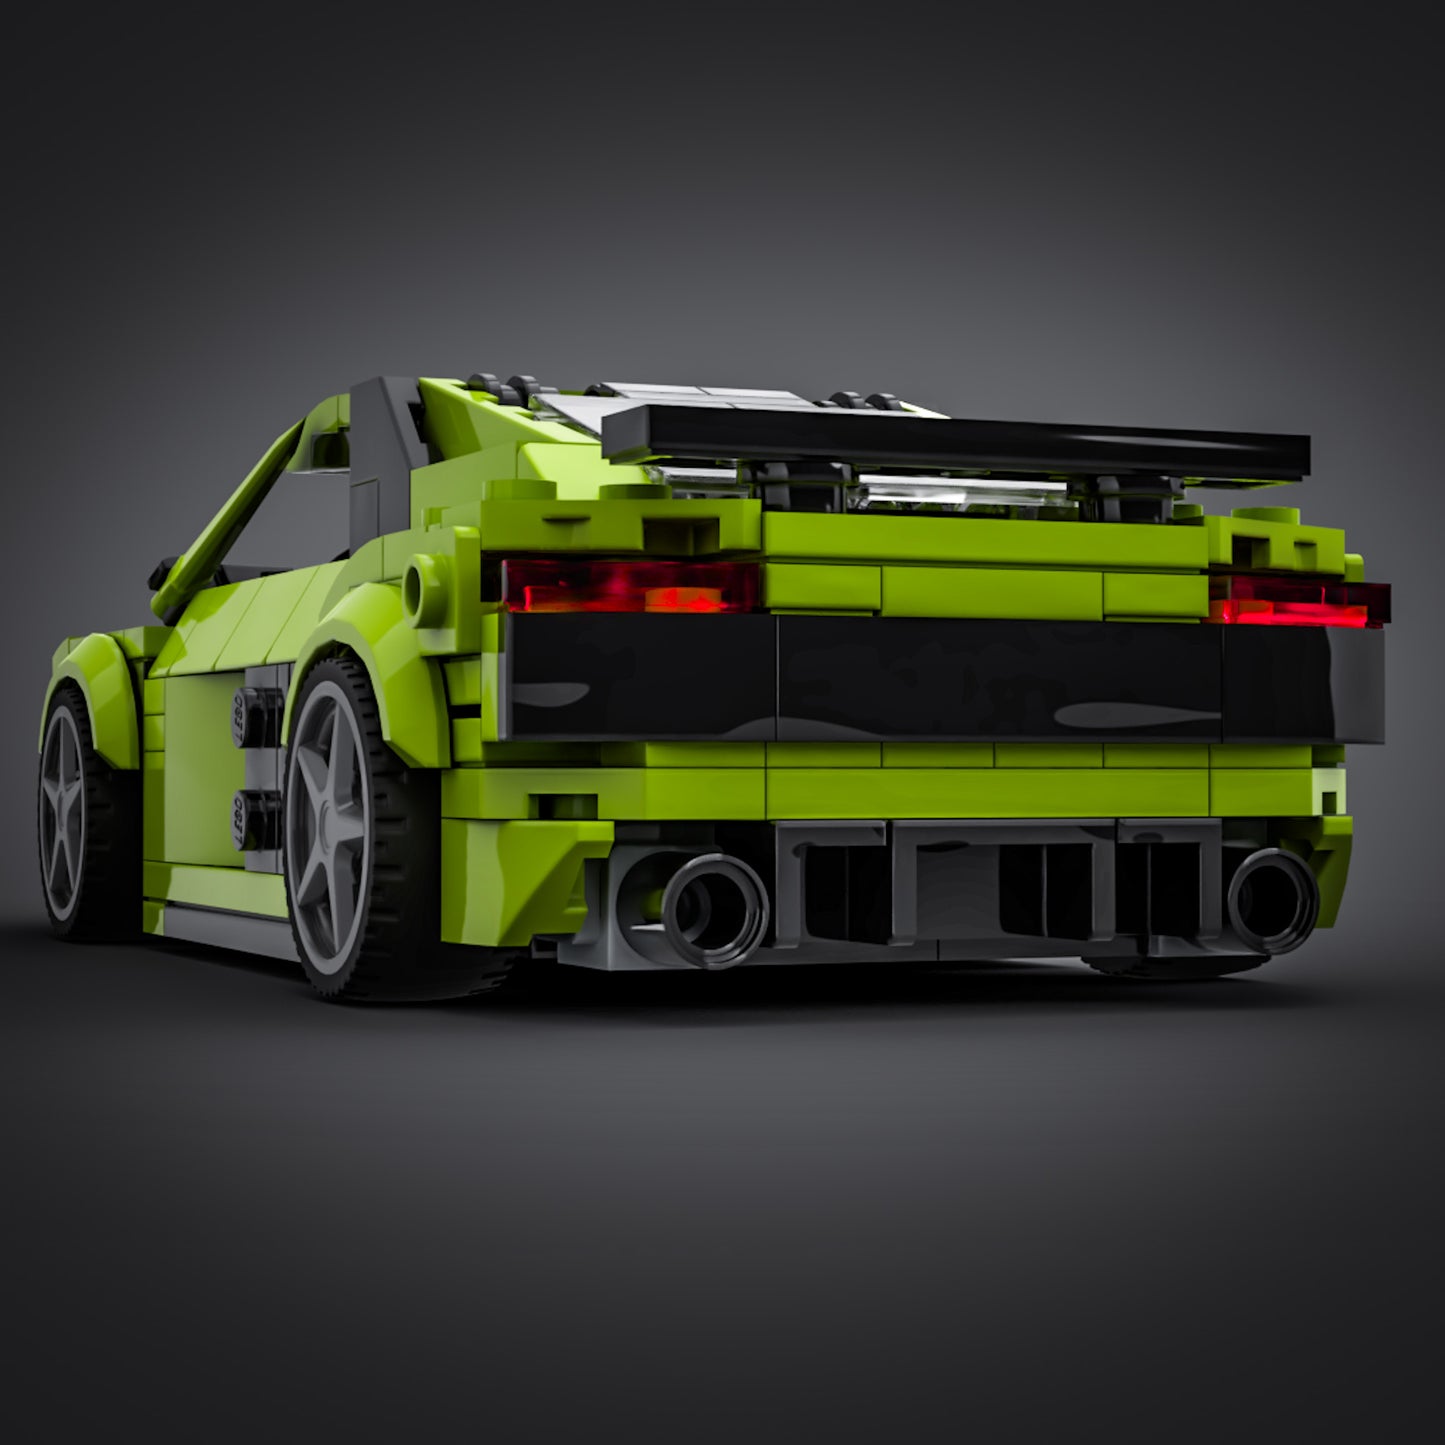 Inspired by Audi R8 - Lime (instructions)